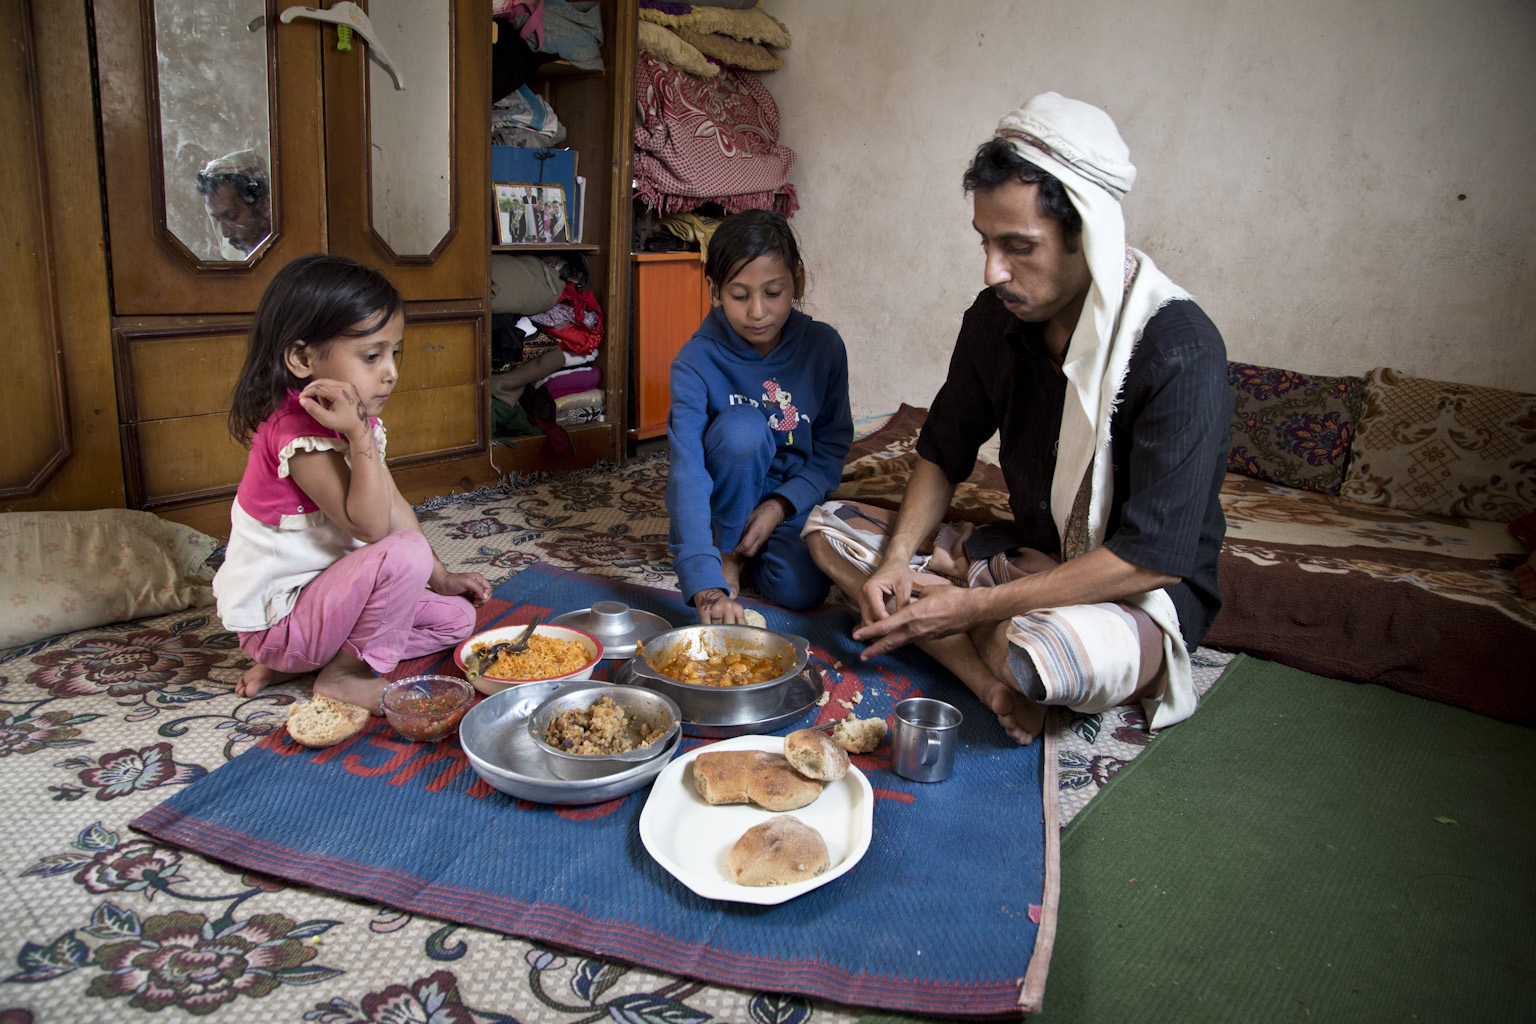 Walid and his two daughters sit on the floor with a blue mat covered in food dishes